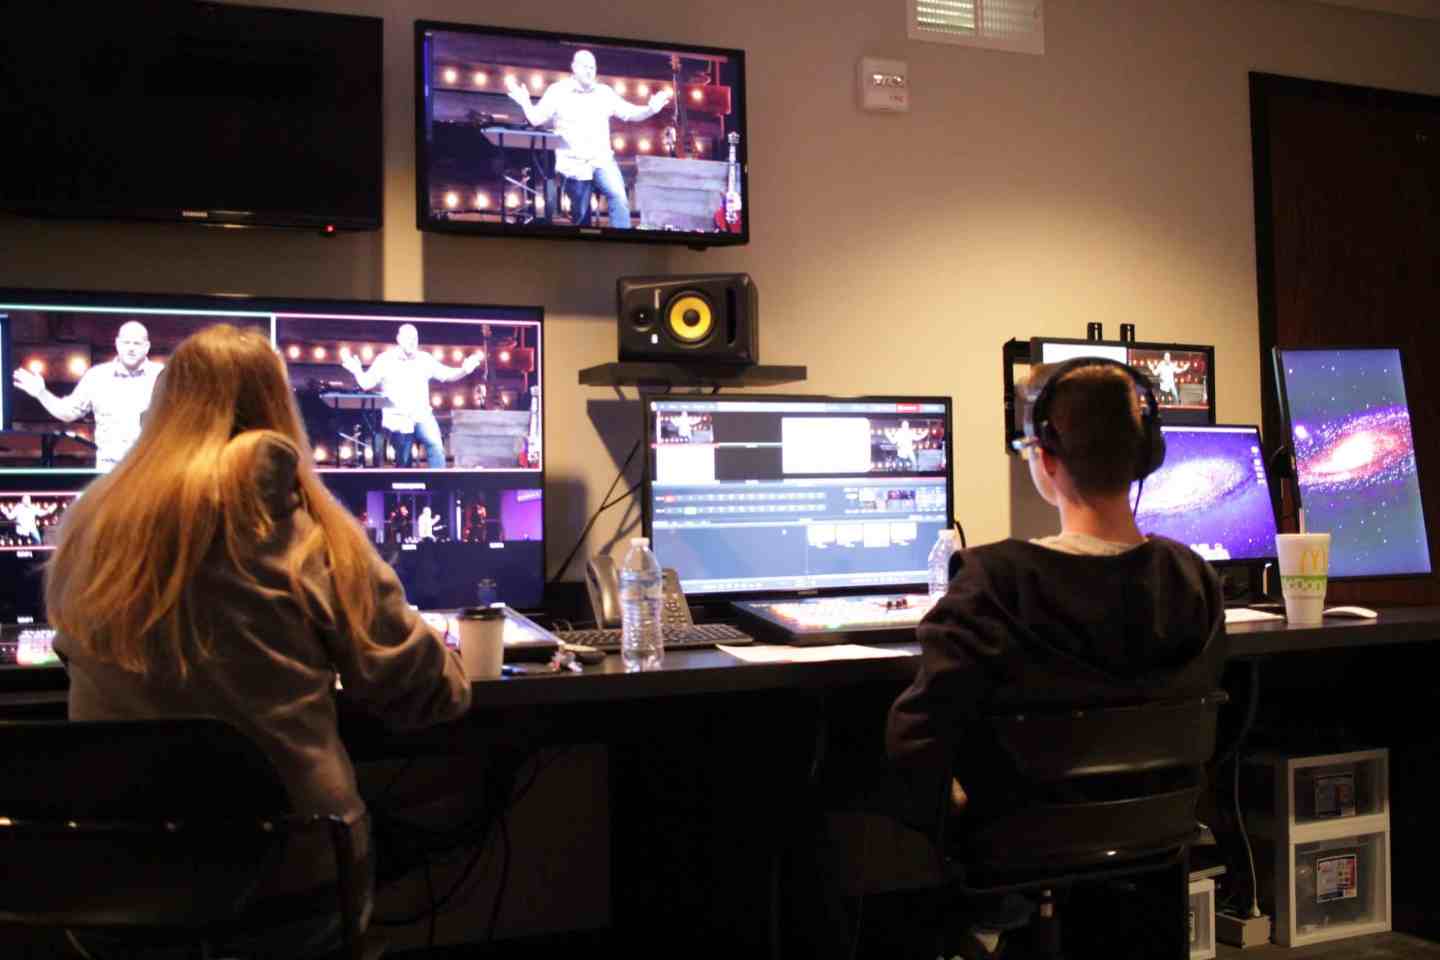 Kansas Church Expands Worship Community With Streaming Technology